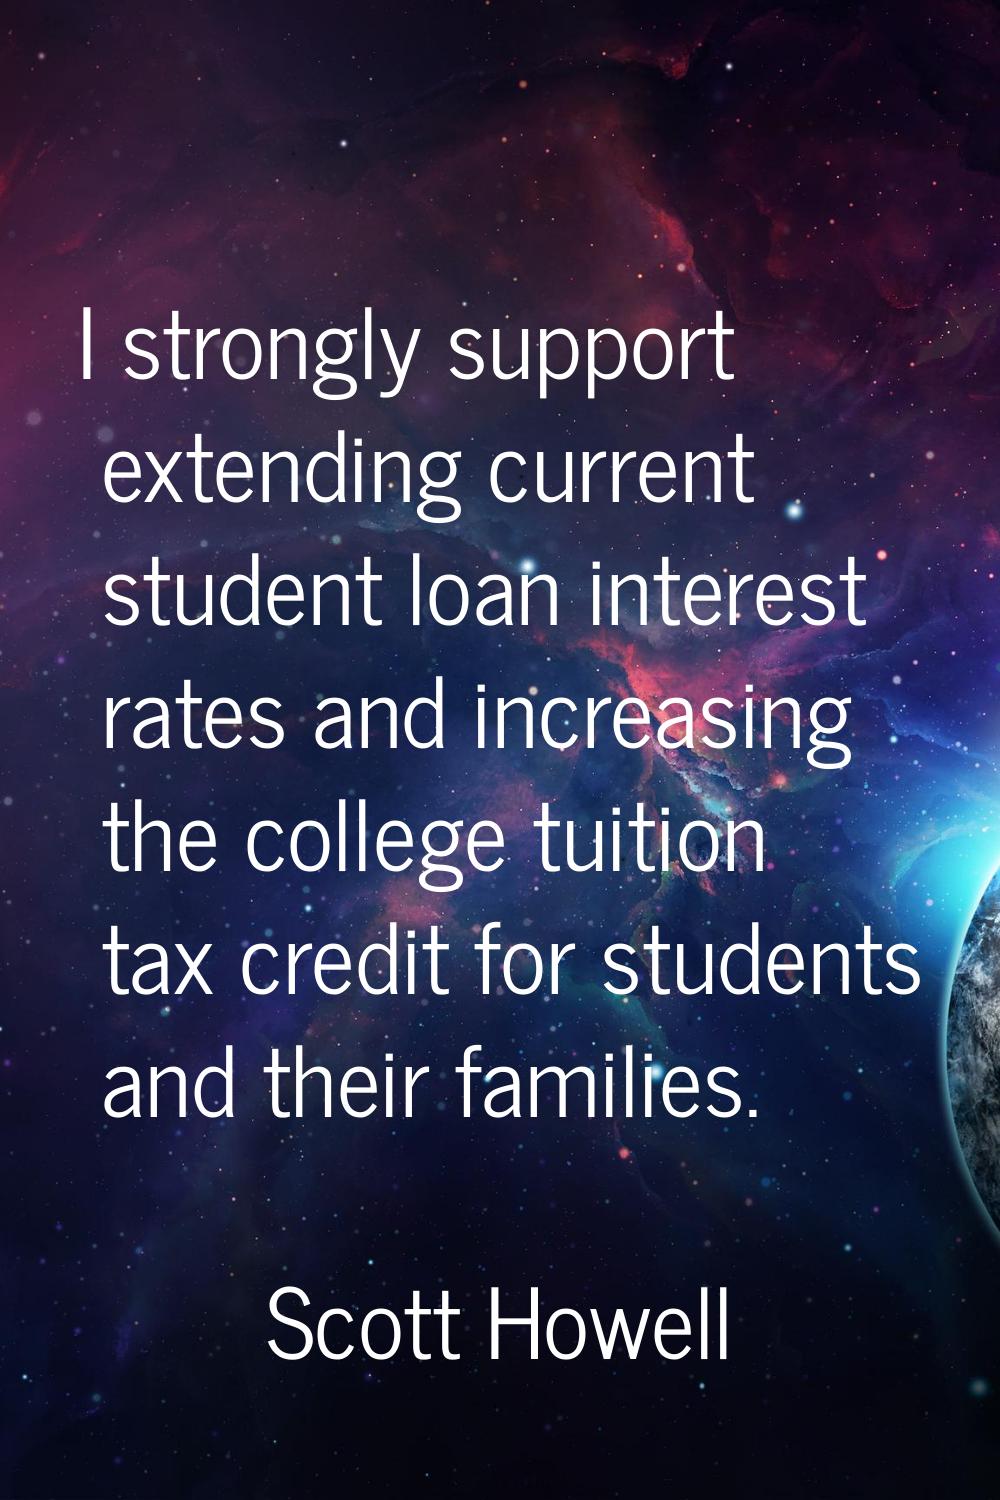 I strongly support extending current student loan interest rates and increasing the college tuition